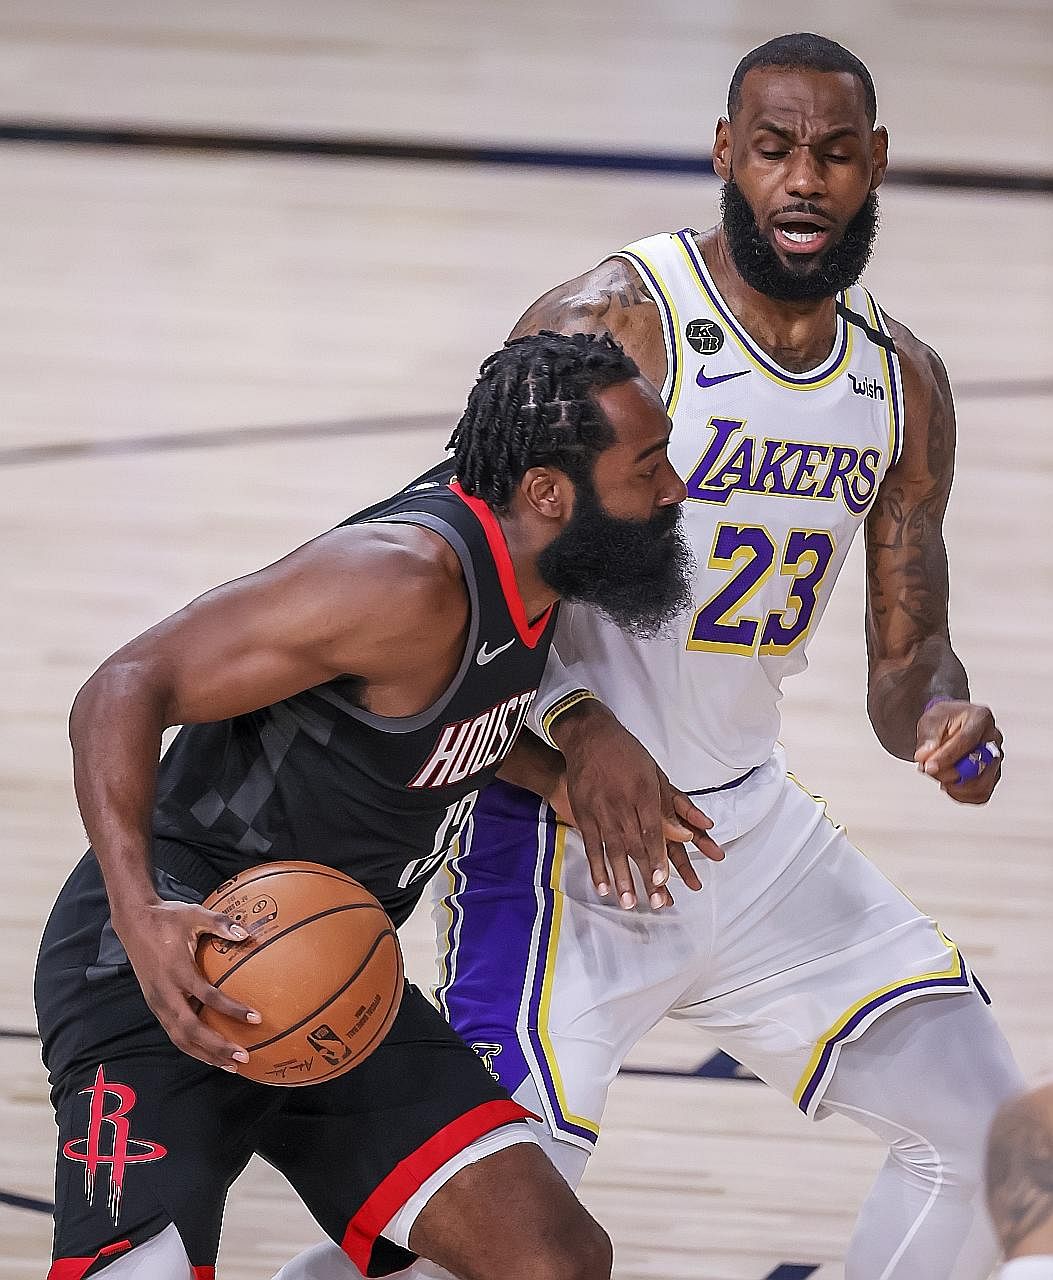 Rockets guard James Harden taking on Lakers forward LeBron James in Game 5 of their Western Conference semi-finals. The Lakers cruised to a 119-96 victory to win the series 4-1. PHOTO: EPA-EFE